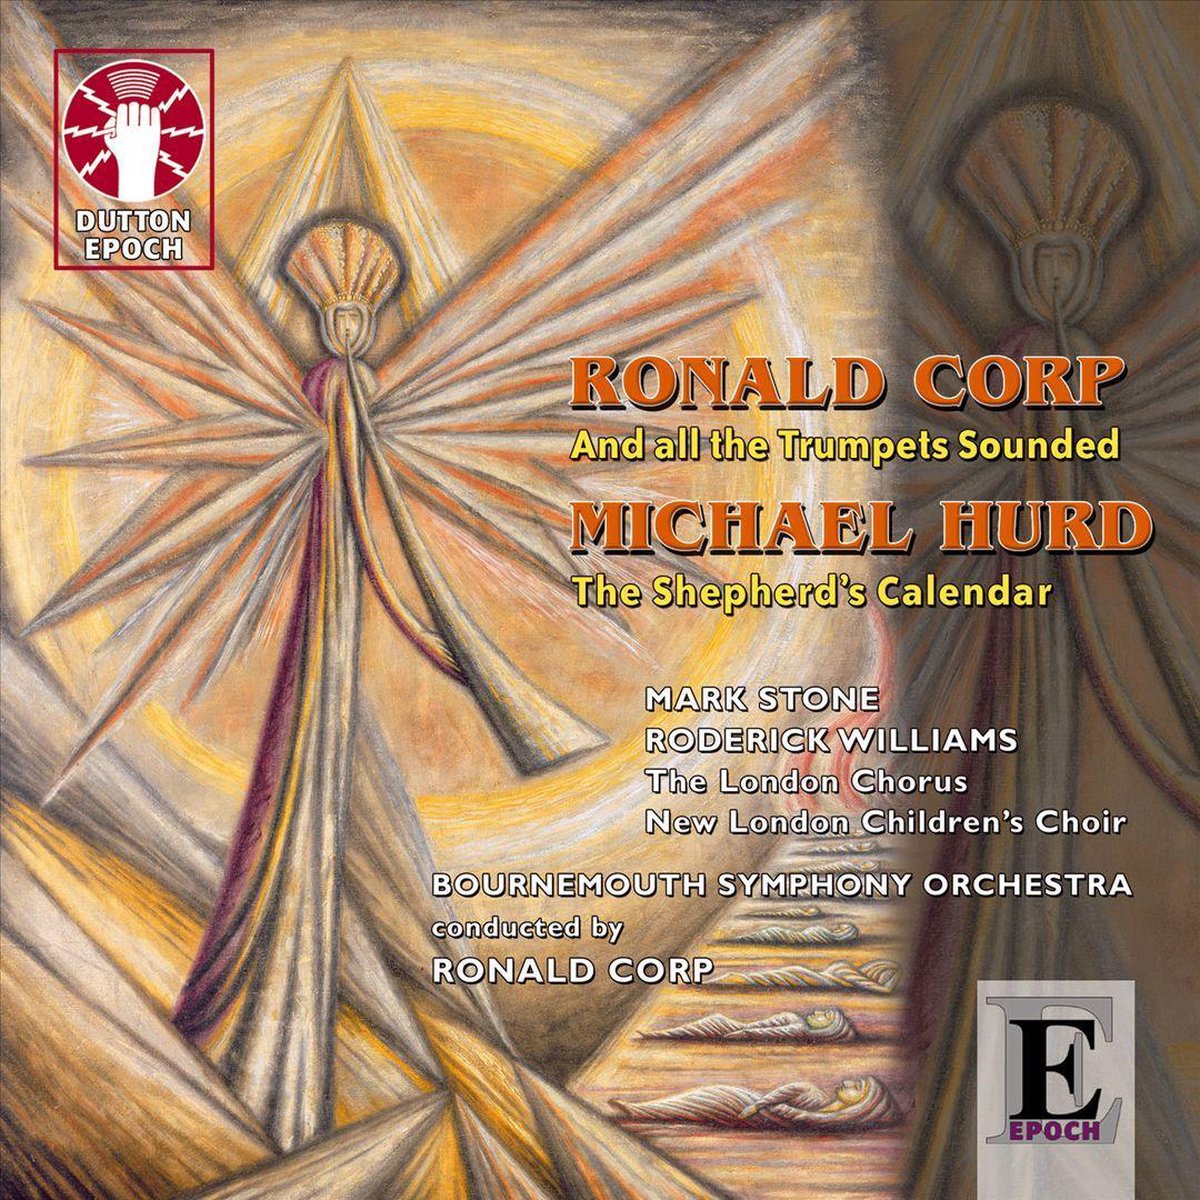 Bournemouth Symphony Orchestra - Ronald Corp & Michael Hurd, Choral Music - Ronald Corp